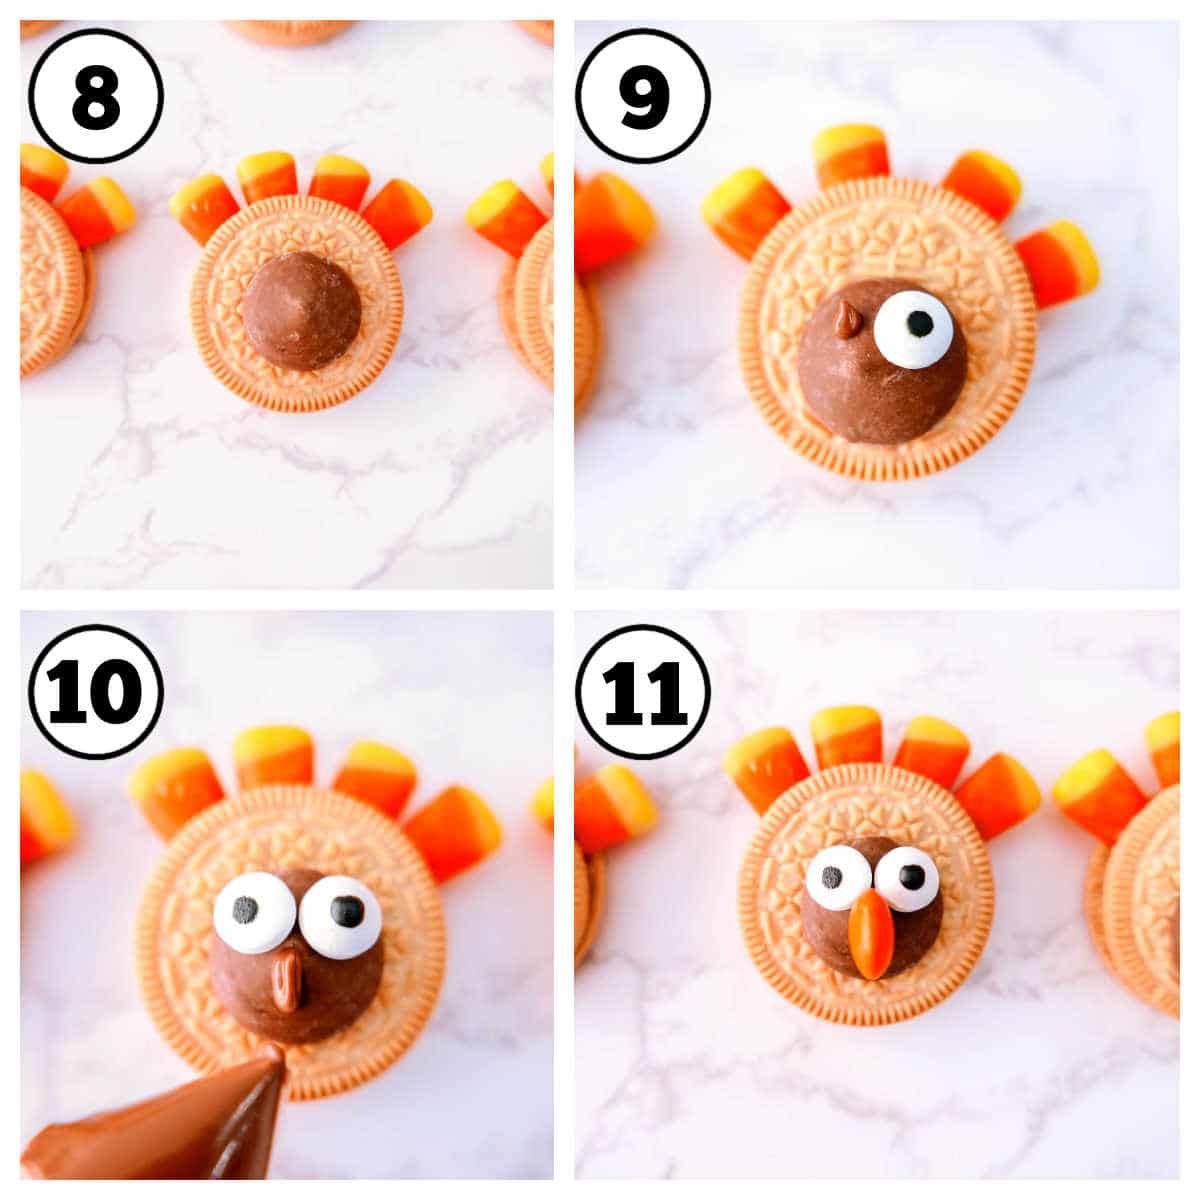 Steps 8-11 of how to make turkey cookies.